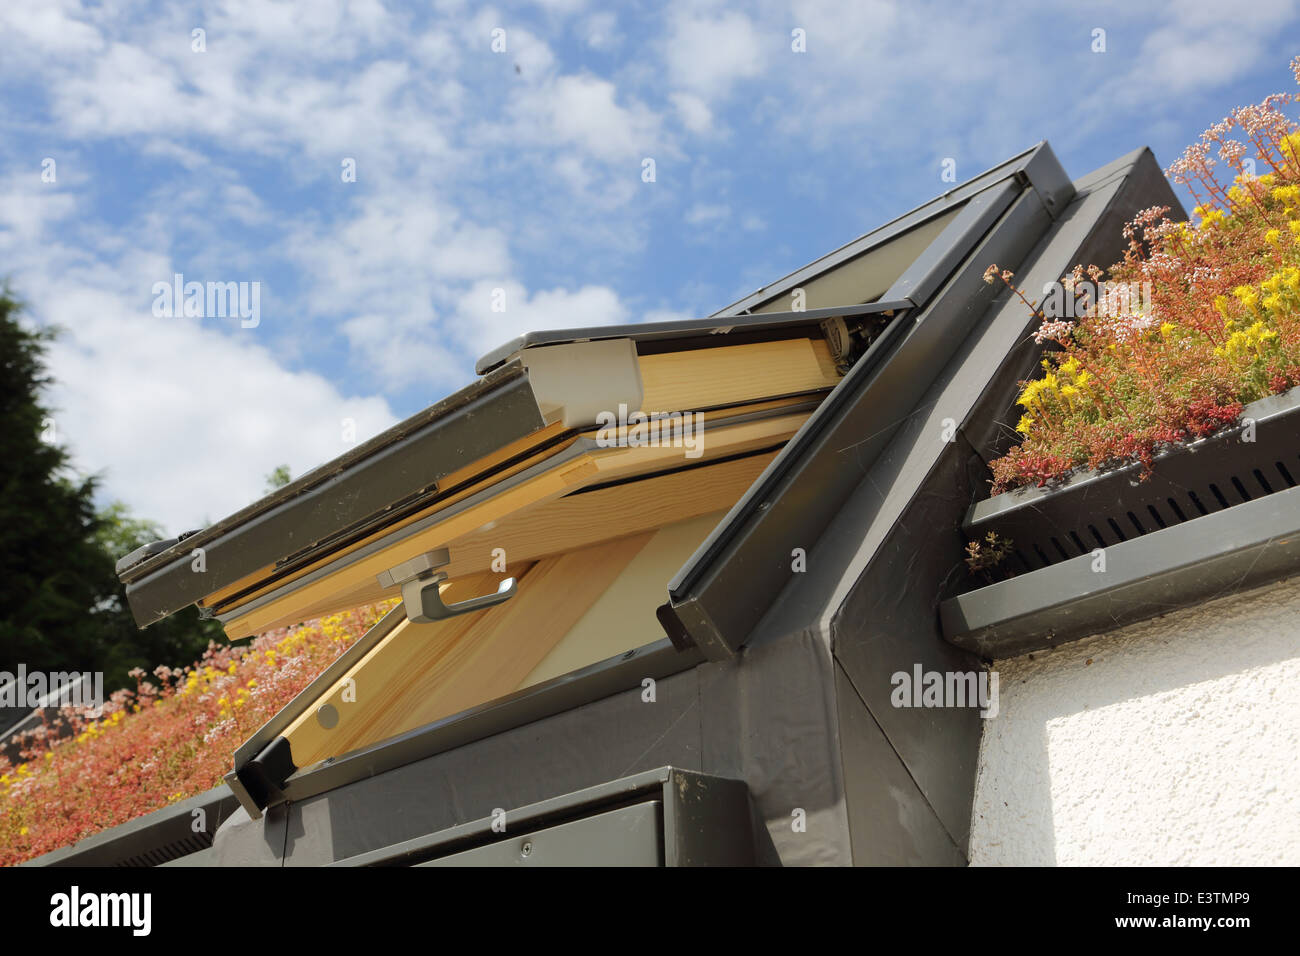 A green roof consisting of a diverse range of sedum plants surround a Fakro roof window on a single storey timber building Stock Photo